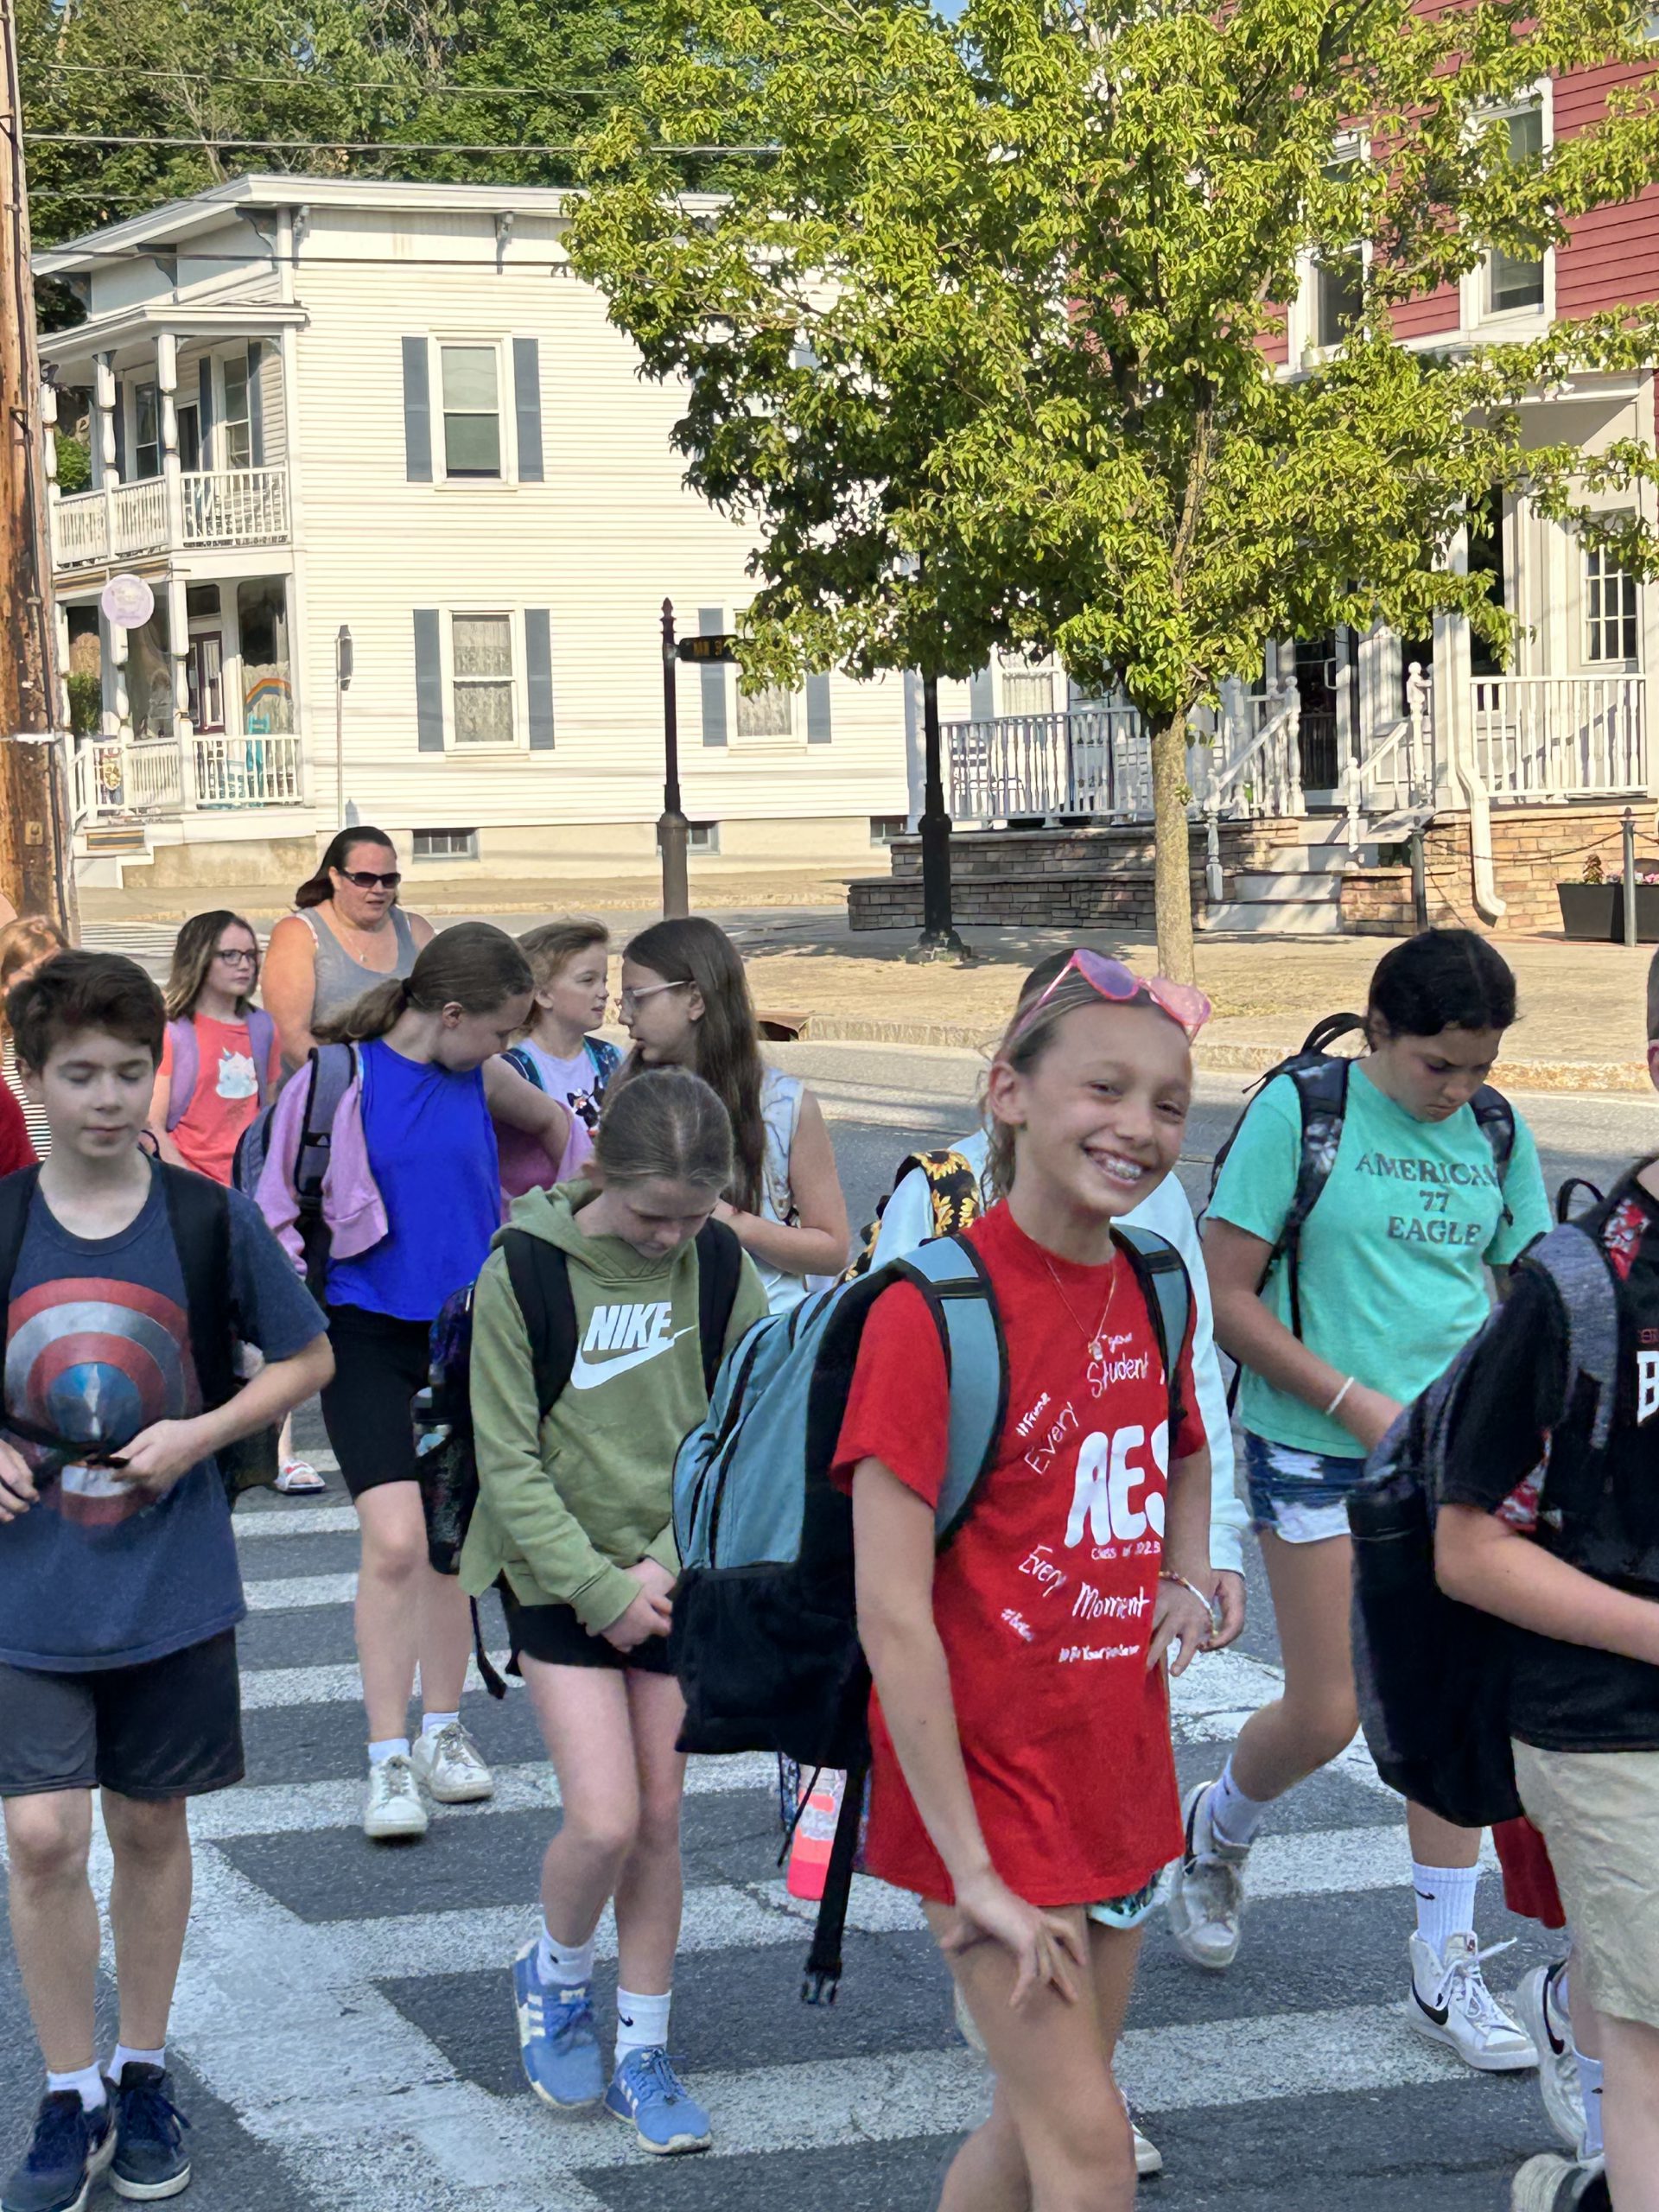 Student smiles at the camera while walking with others to school. The student is wearing a red t-shirt and a backpack.